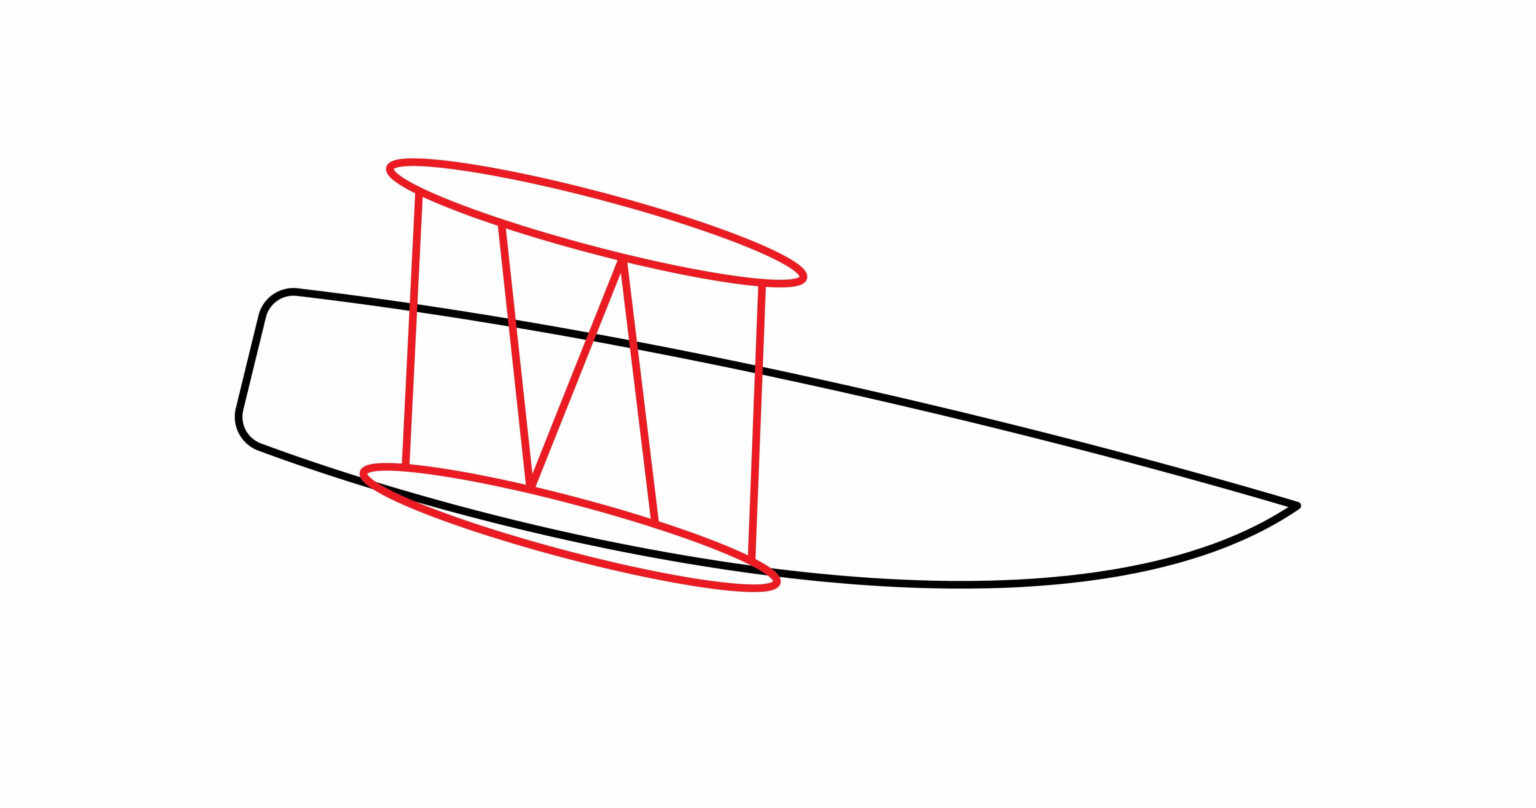 How To Draw An Old Biplane | A Step-By-Step Tutorial | Edits 101